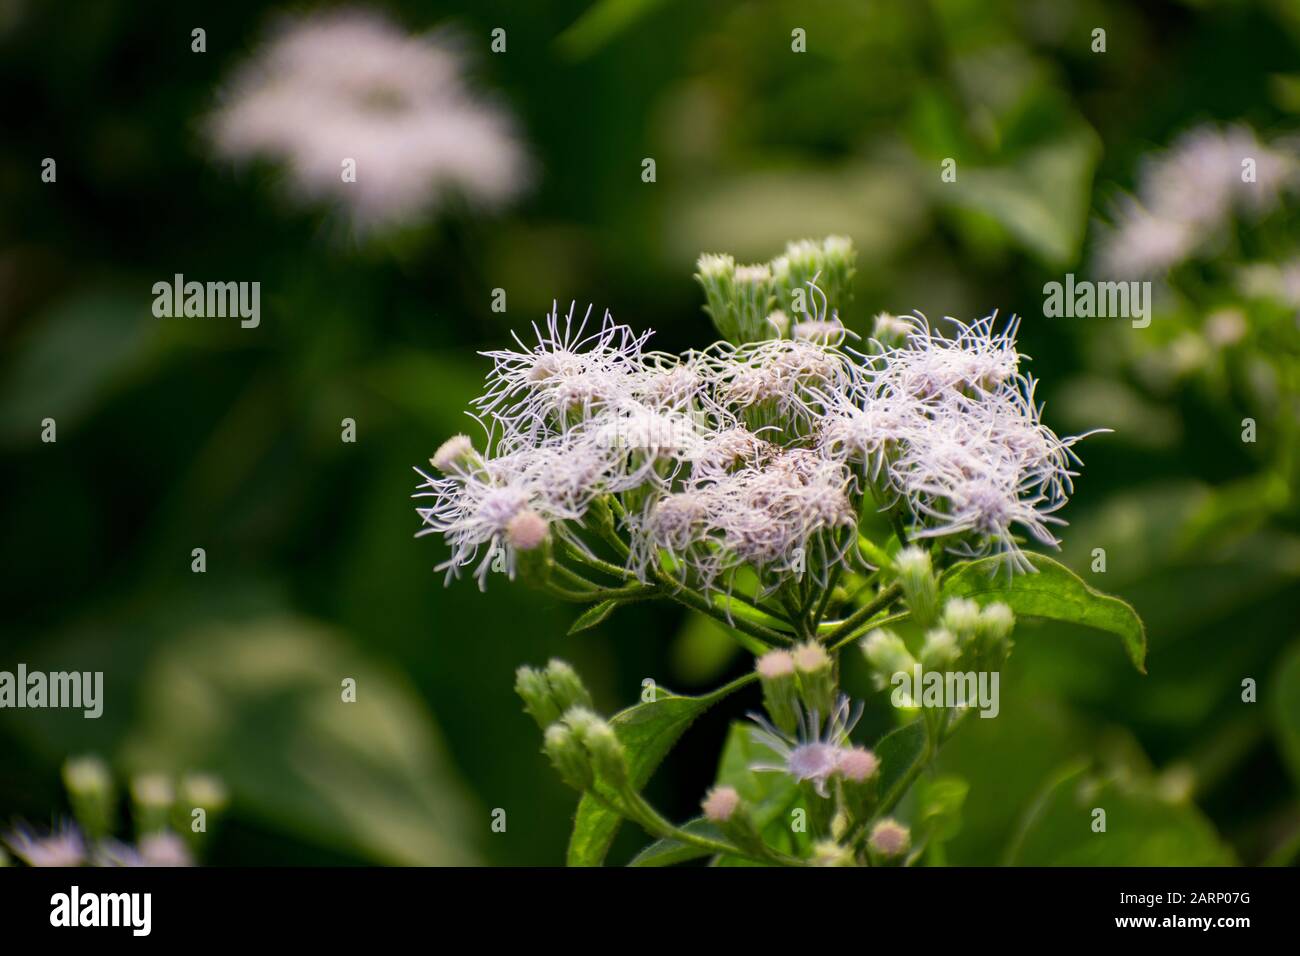 Angelica pubescens is a plant in the family Apiaceae, native to Japan and China. Stock Photo